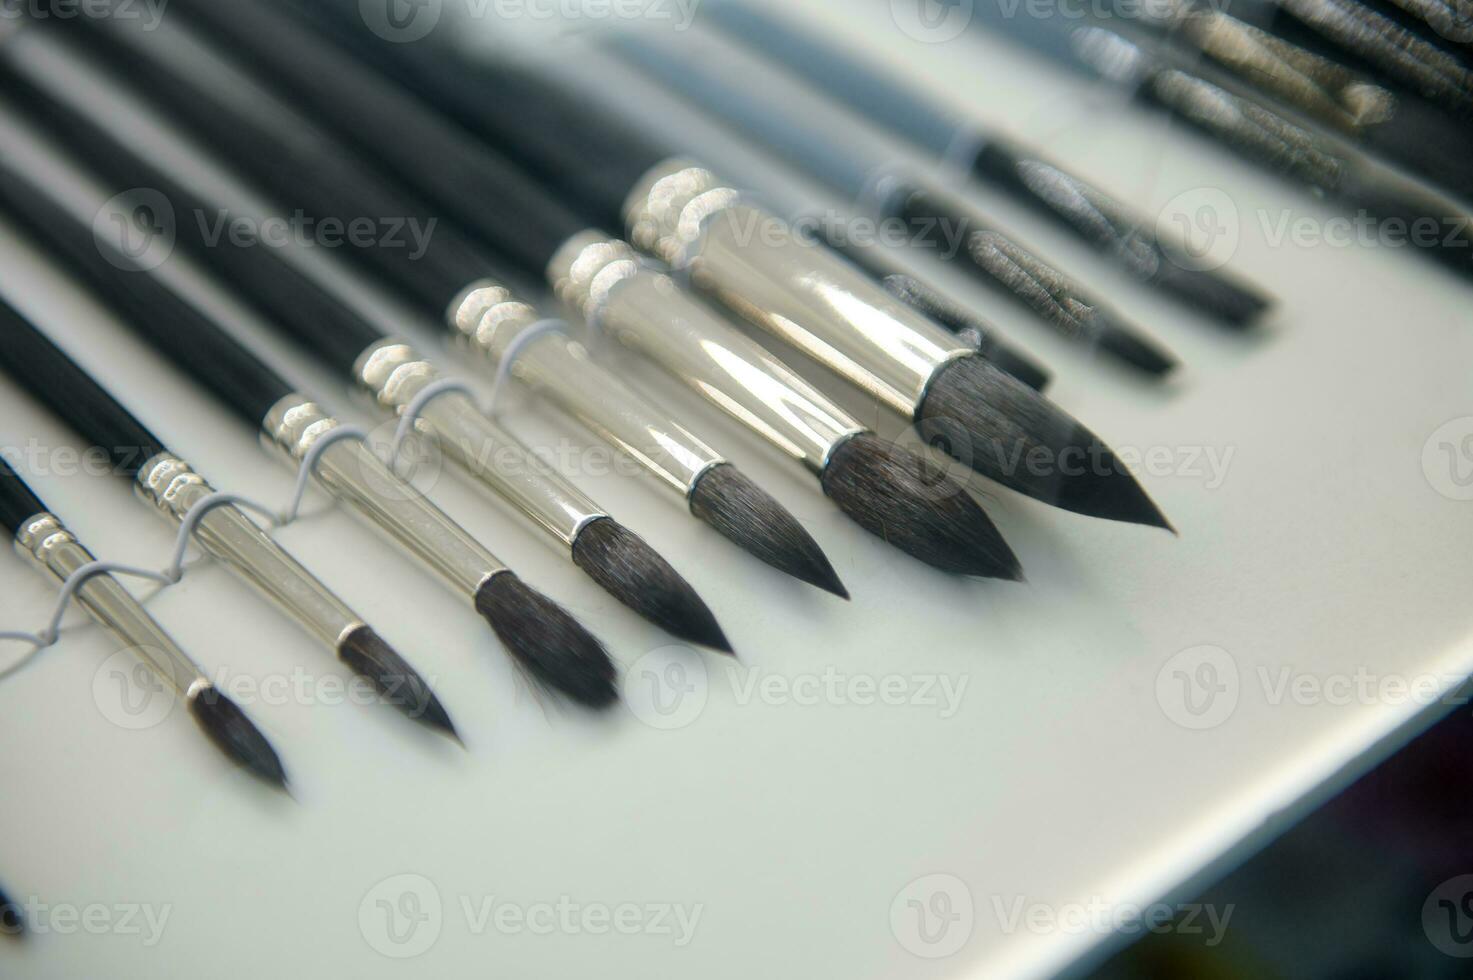 Paintbrushes of various sizes with wooden handle and natural bristle on white surface, displayed for sale in art store photo